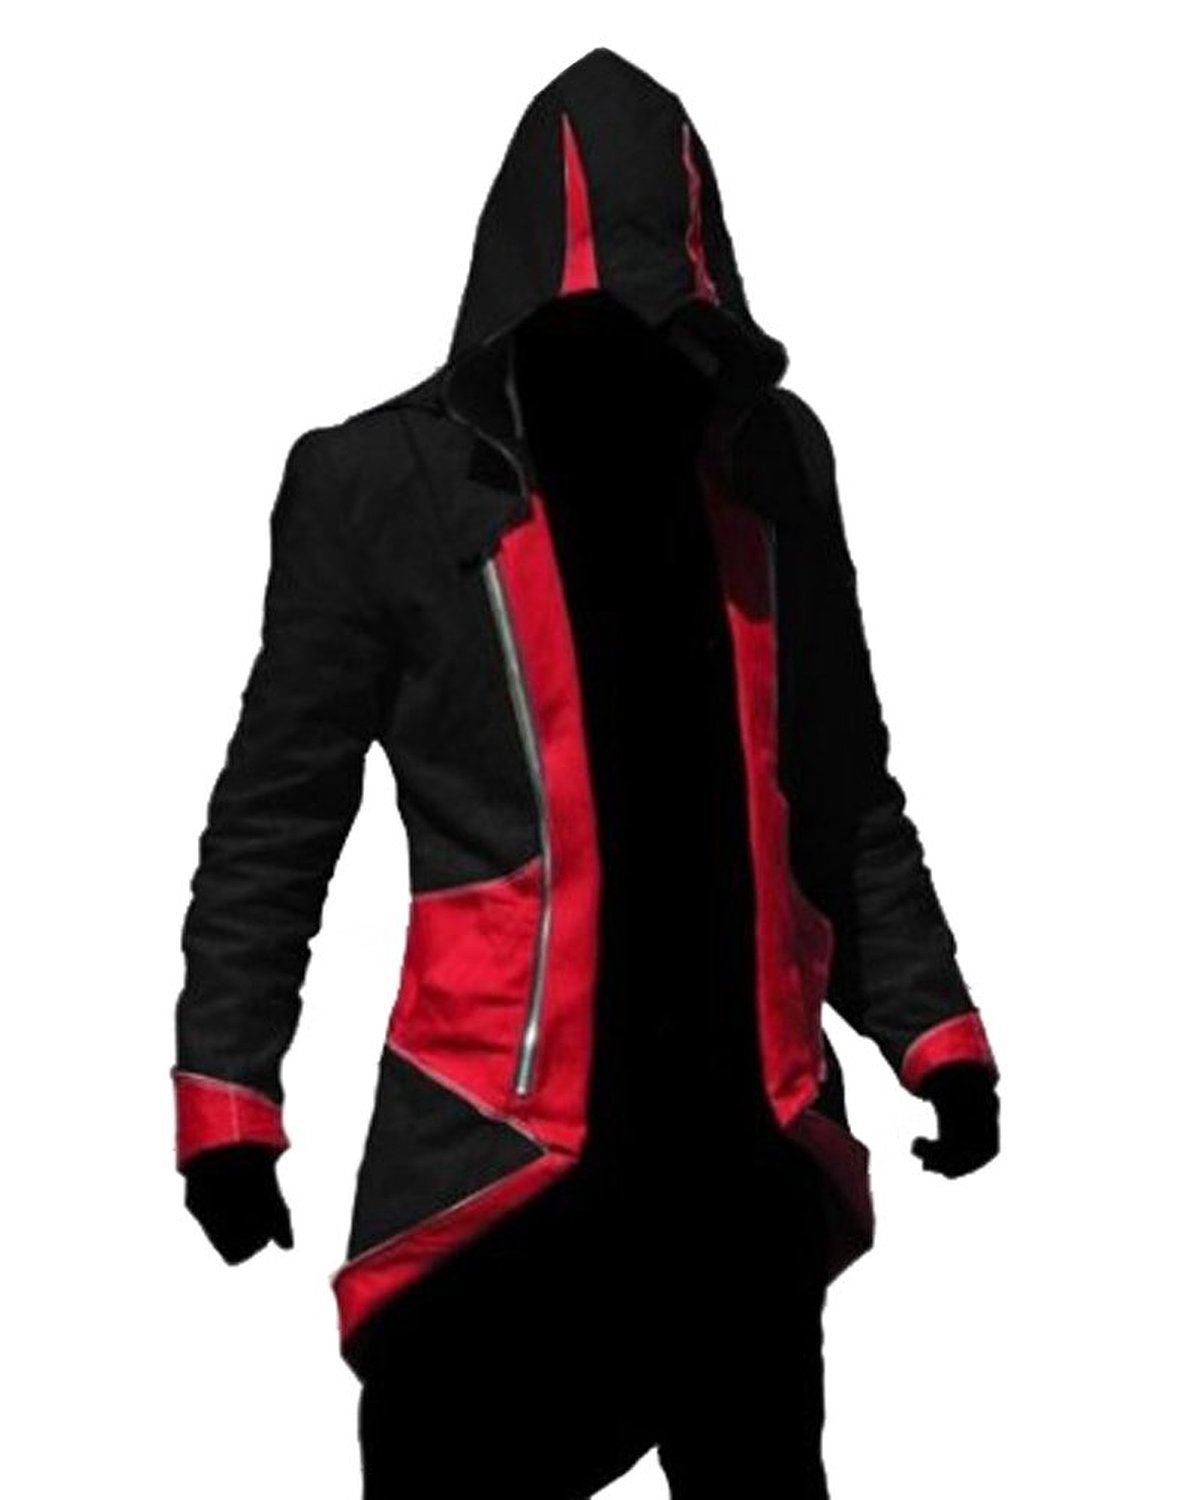 Assassins Creed III Connor Kenway Red / Black Cotton Jacket Costume | Cotton Jacket For Men's